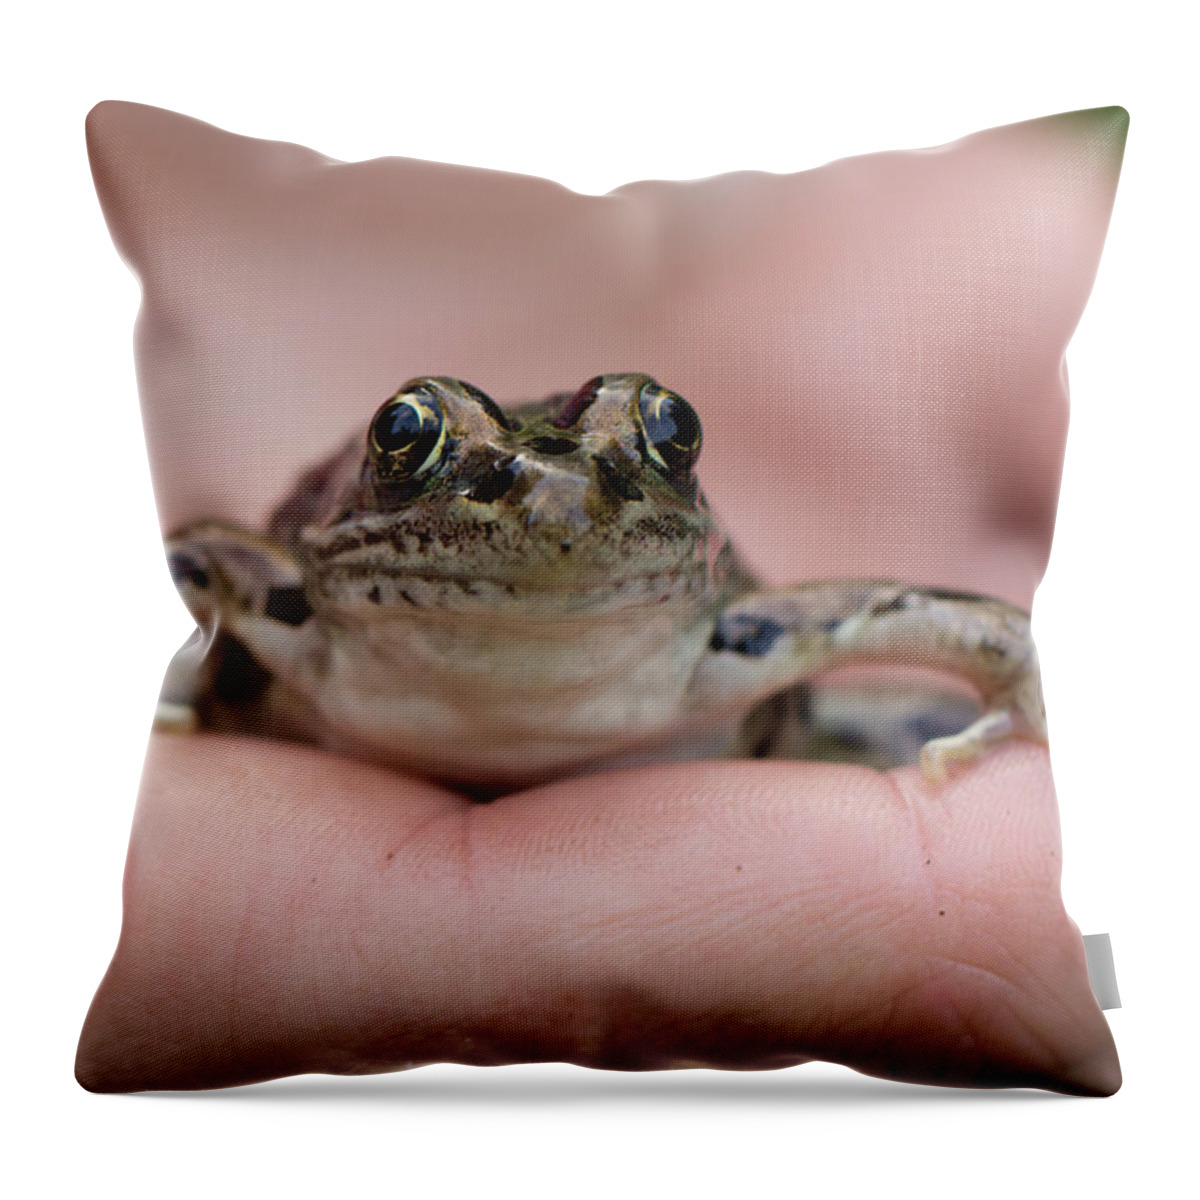 Animals Throw Pillow featuring the photograph Frog by Jakub Sisak